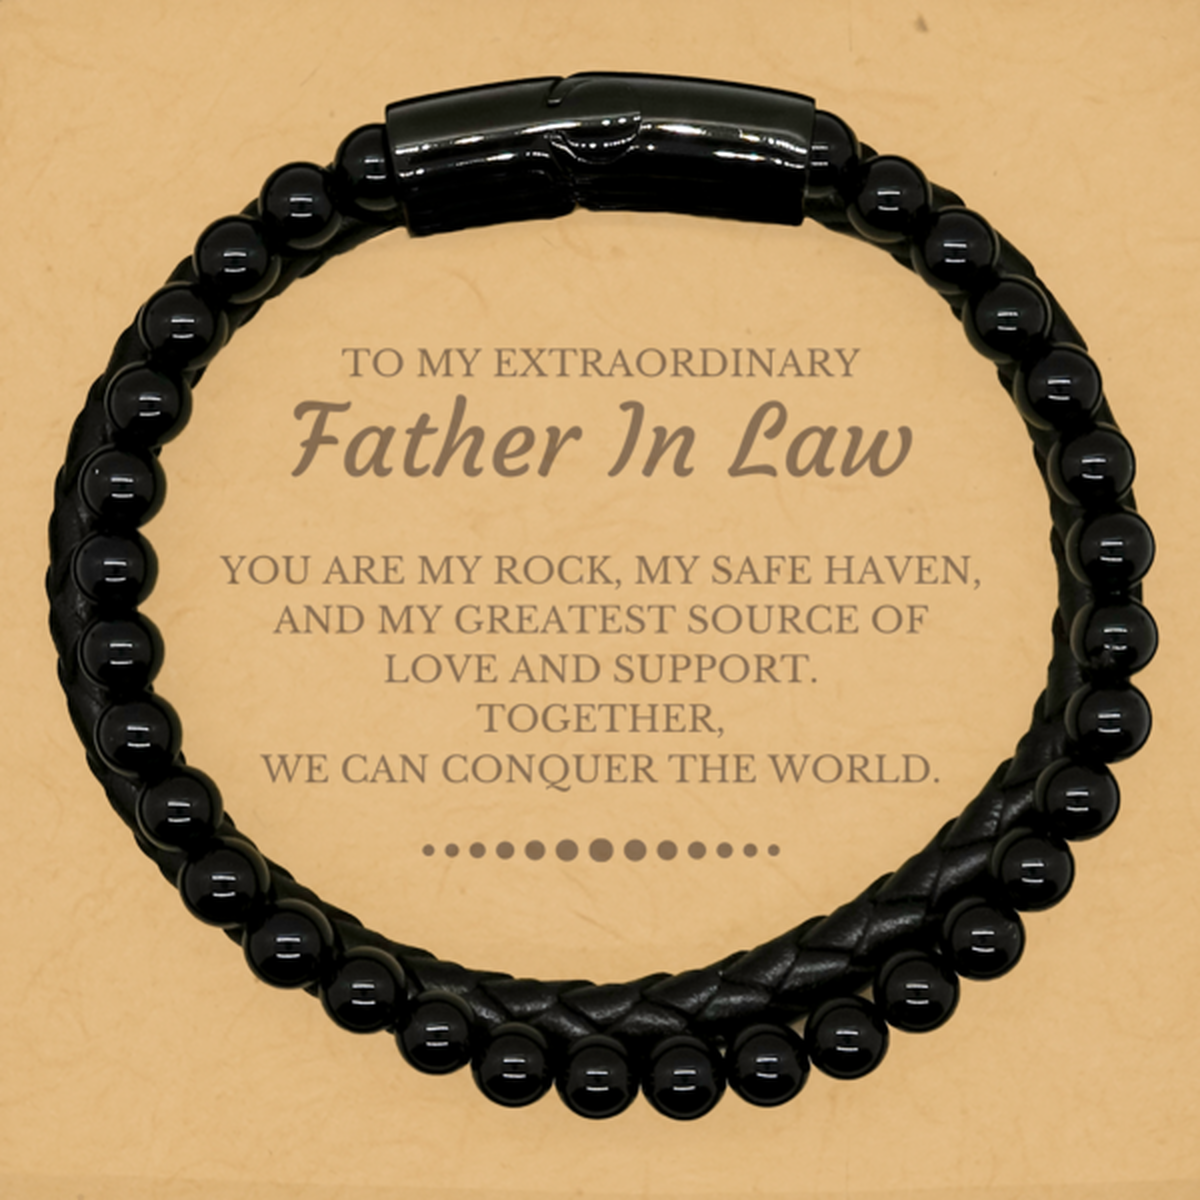 To My Extraordinary Father In Law Gifts, Together, we can conquer the world, Birthday Stone Leather Bracelets For Father In Law, Christmas Gifts For Father In Law